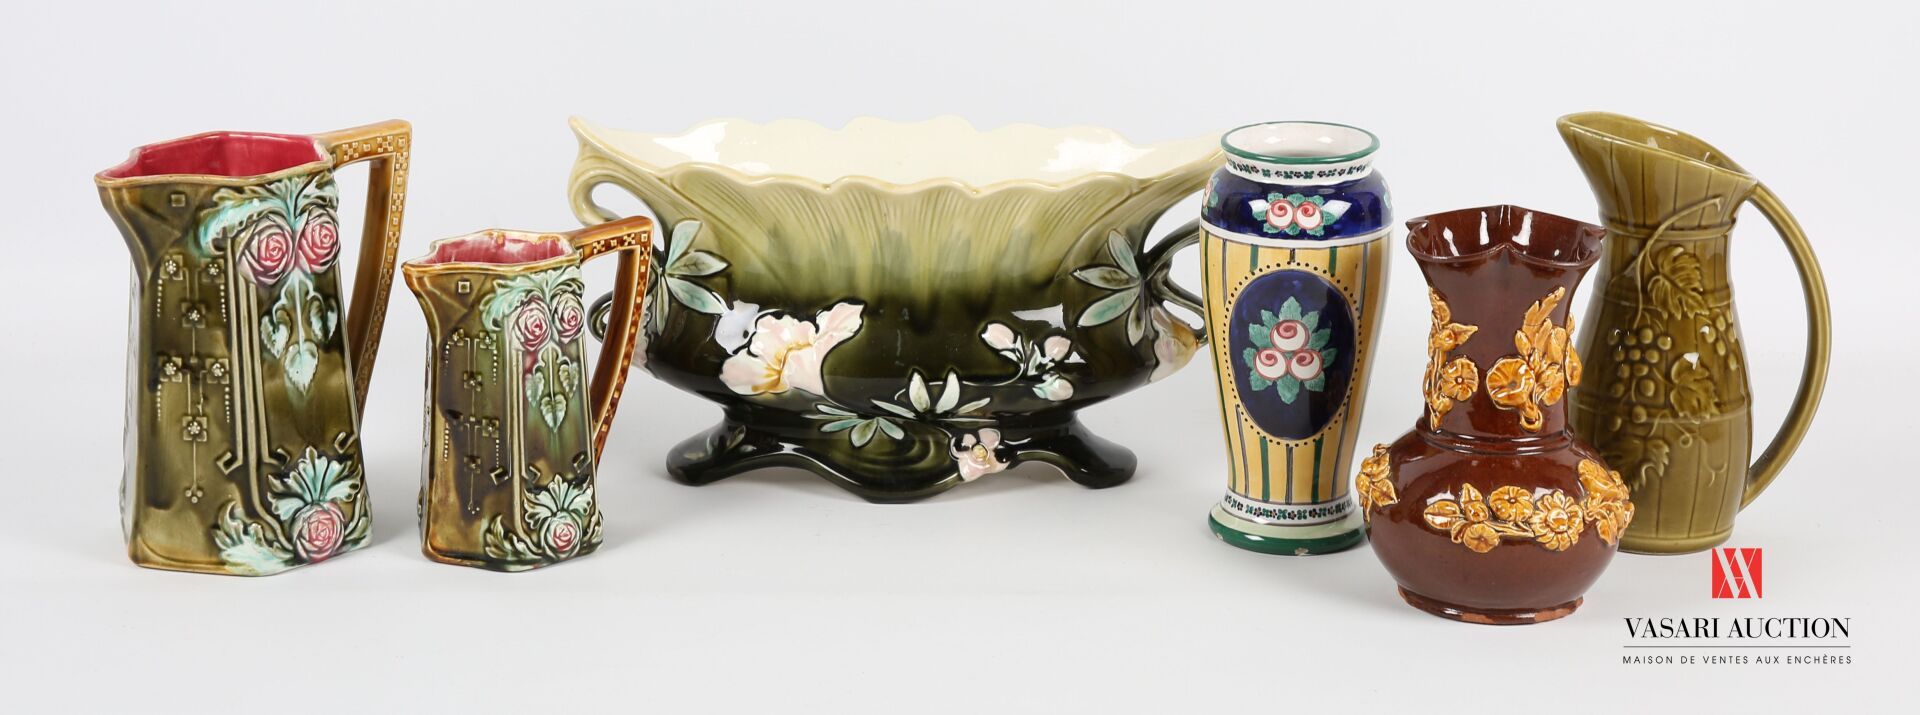 Null Lot including a jardinière in earthenware of the manufacture De Bruyn in Fi&hellip;